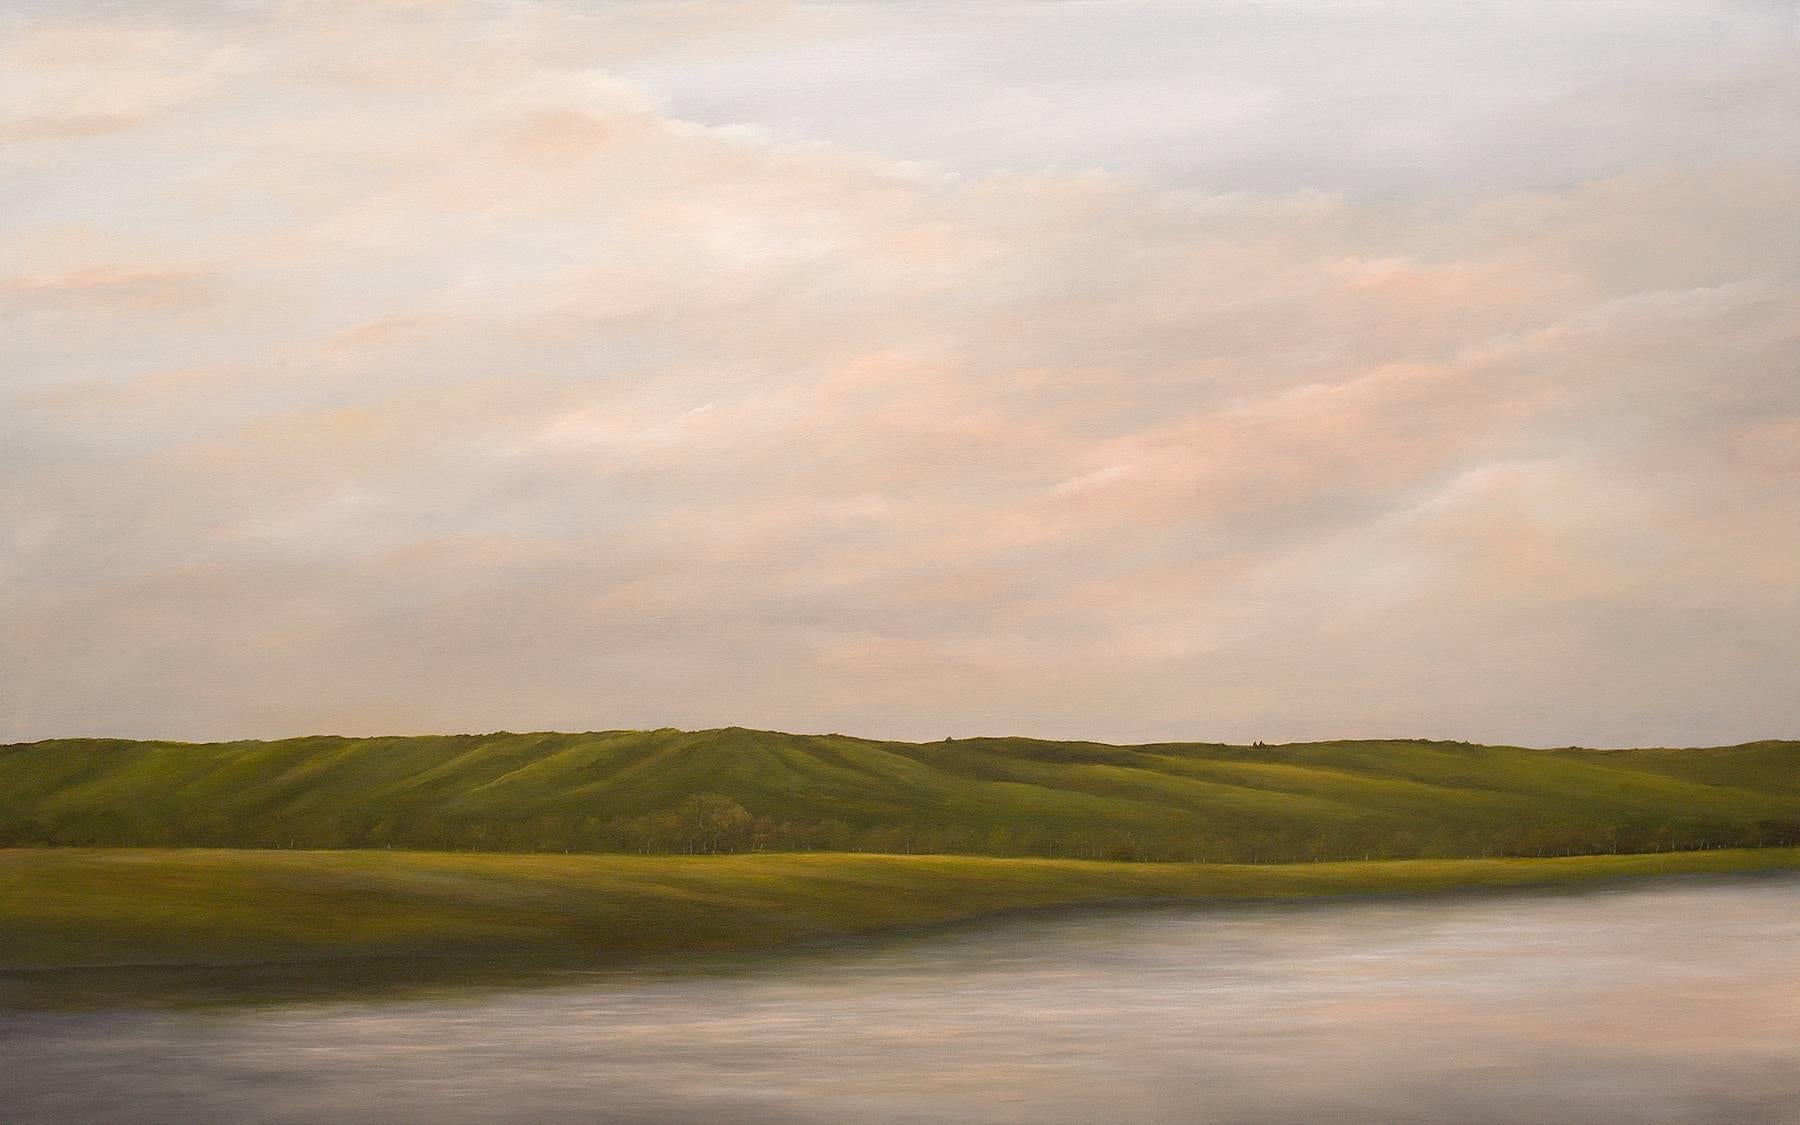 Channeling the Midwest and Western landscapes as sources for his mood-rich paintings, Bogosian has developed an extensive and breathtaking body of work. According to Bogosian, “My work is a response to the atmospheric, sublime qualities and